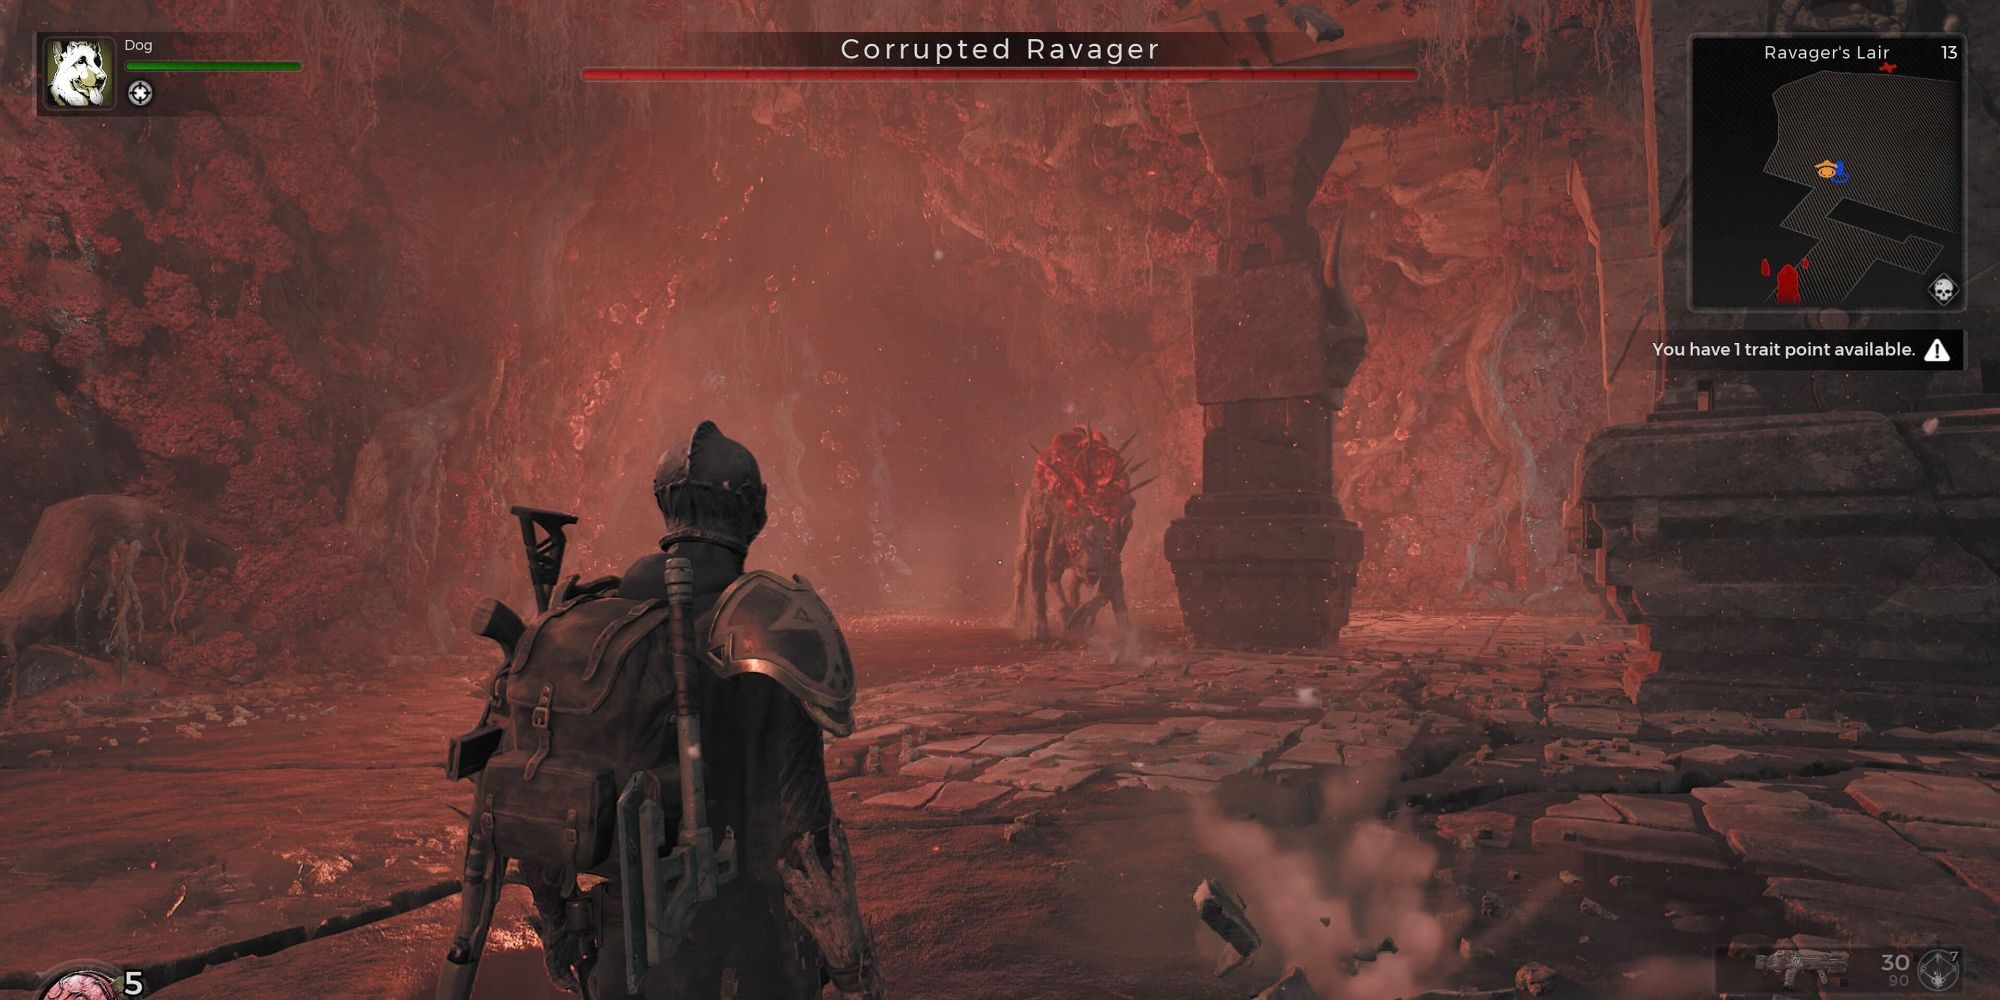 A player in Remnant 2 in a battle with the Corrupted Ravager